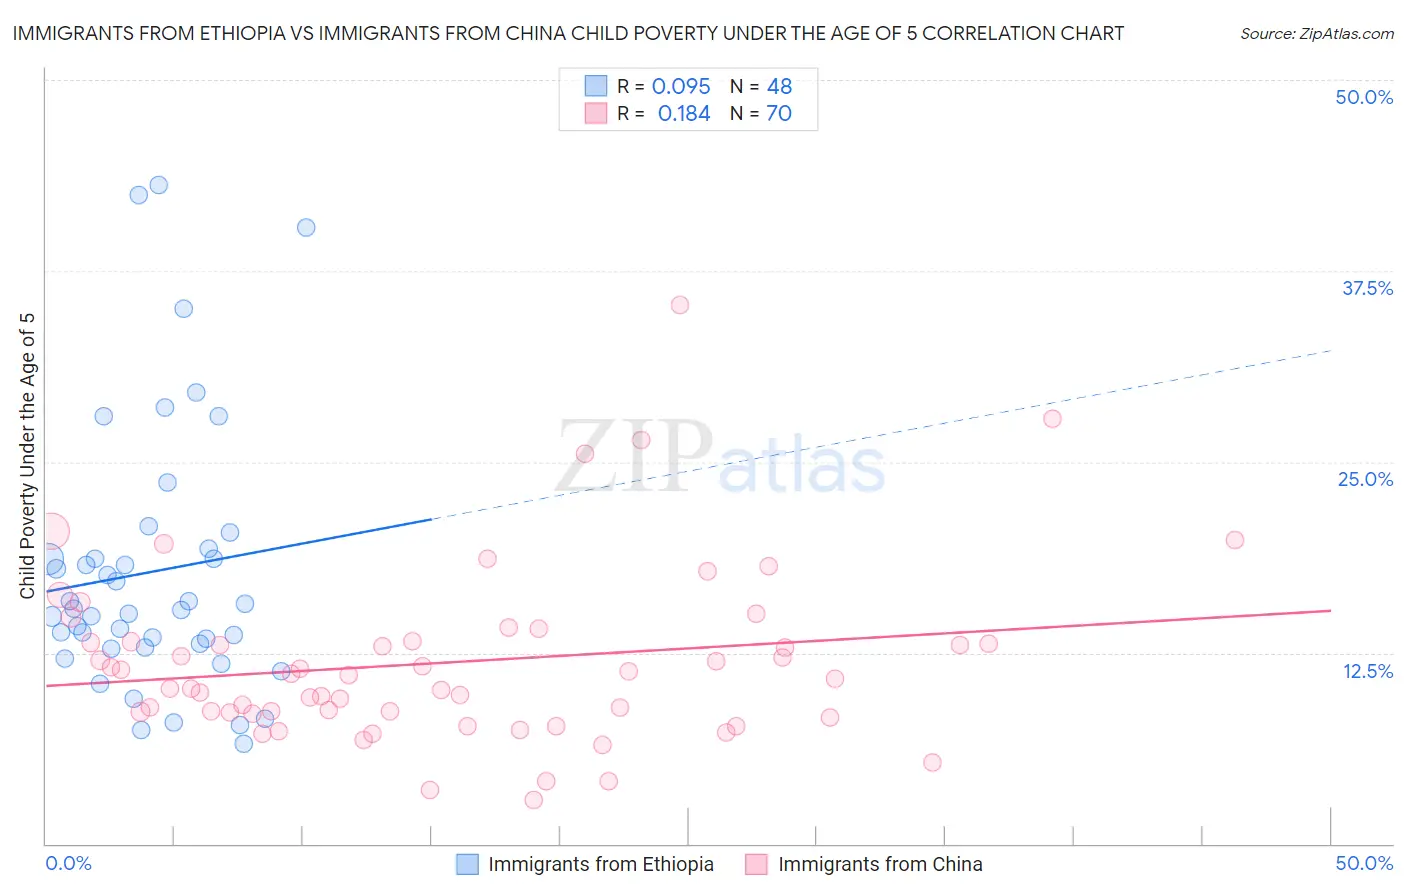 Immigrants from Ethiopia vs Immigrants from China Child Poverty Under the Age of 5